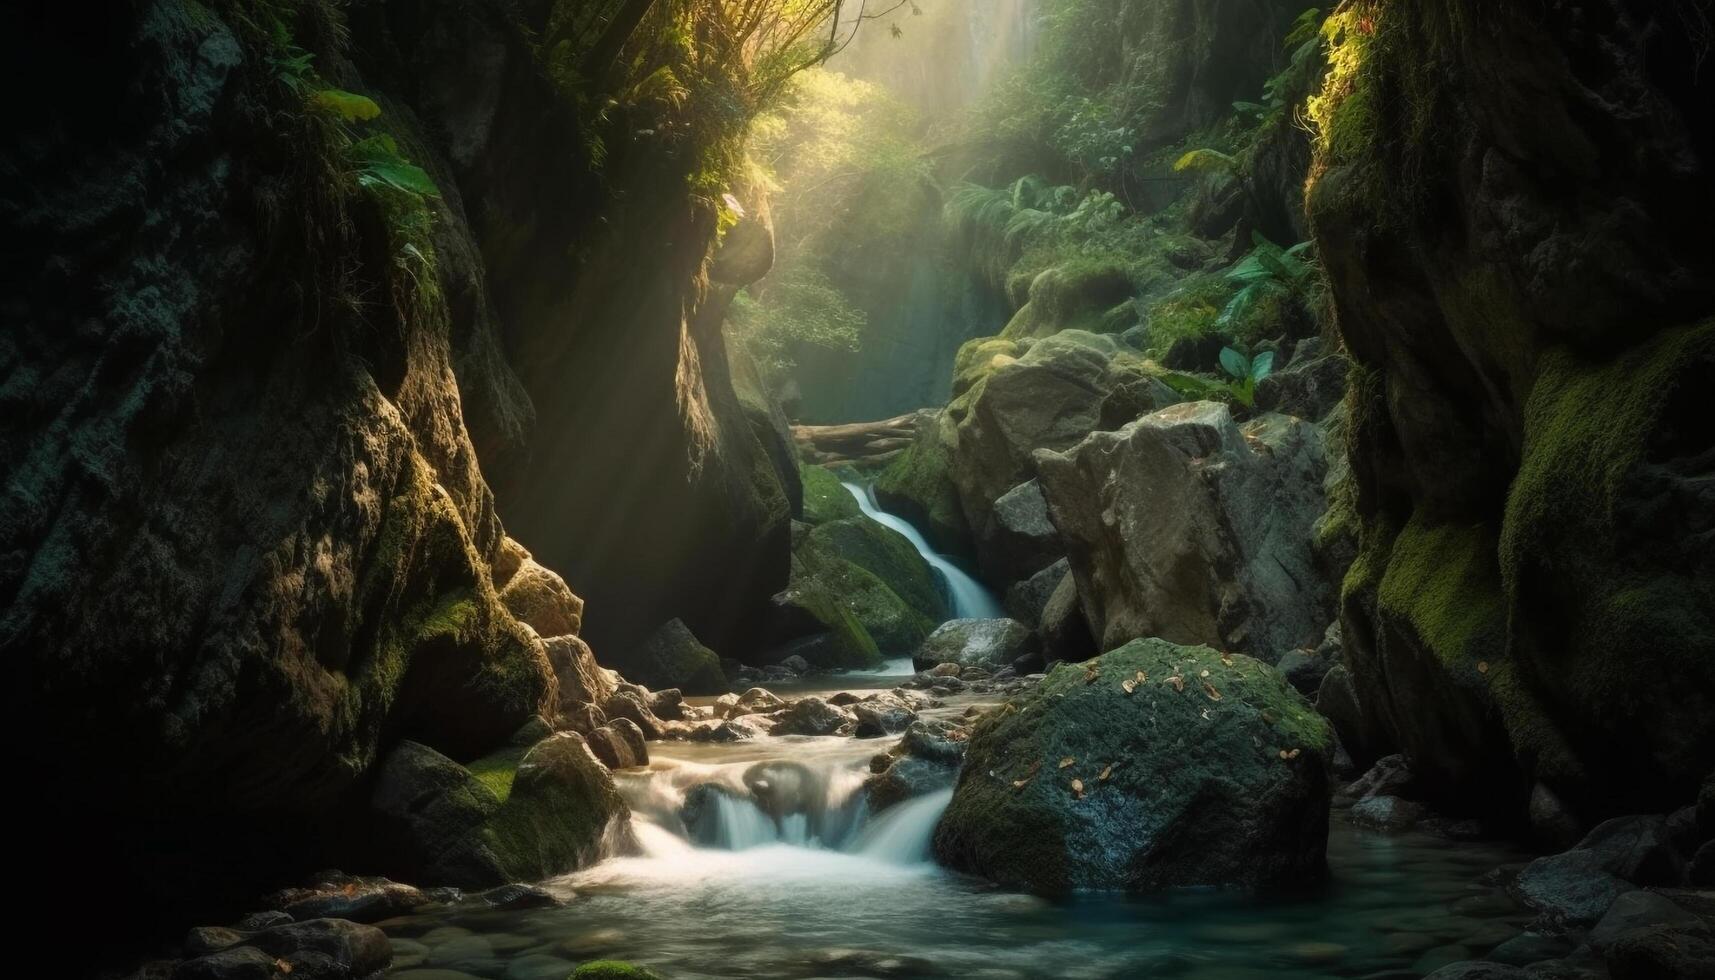 Tranquil scene of majestic mountain, flowing water, and natural beauty generated by AI photo